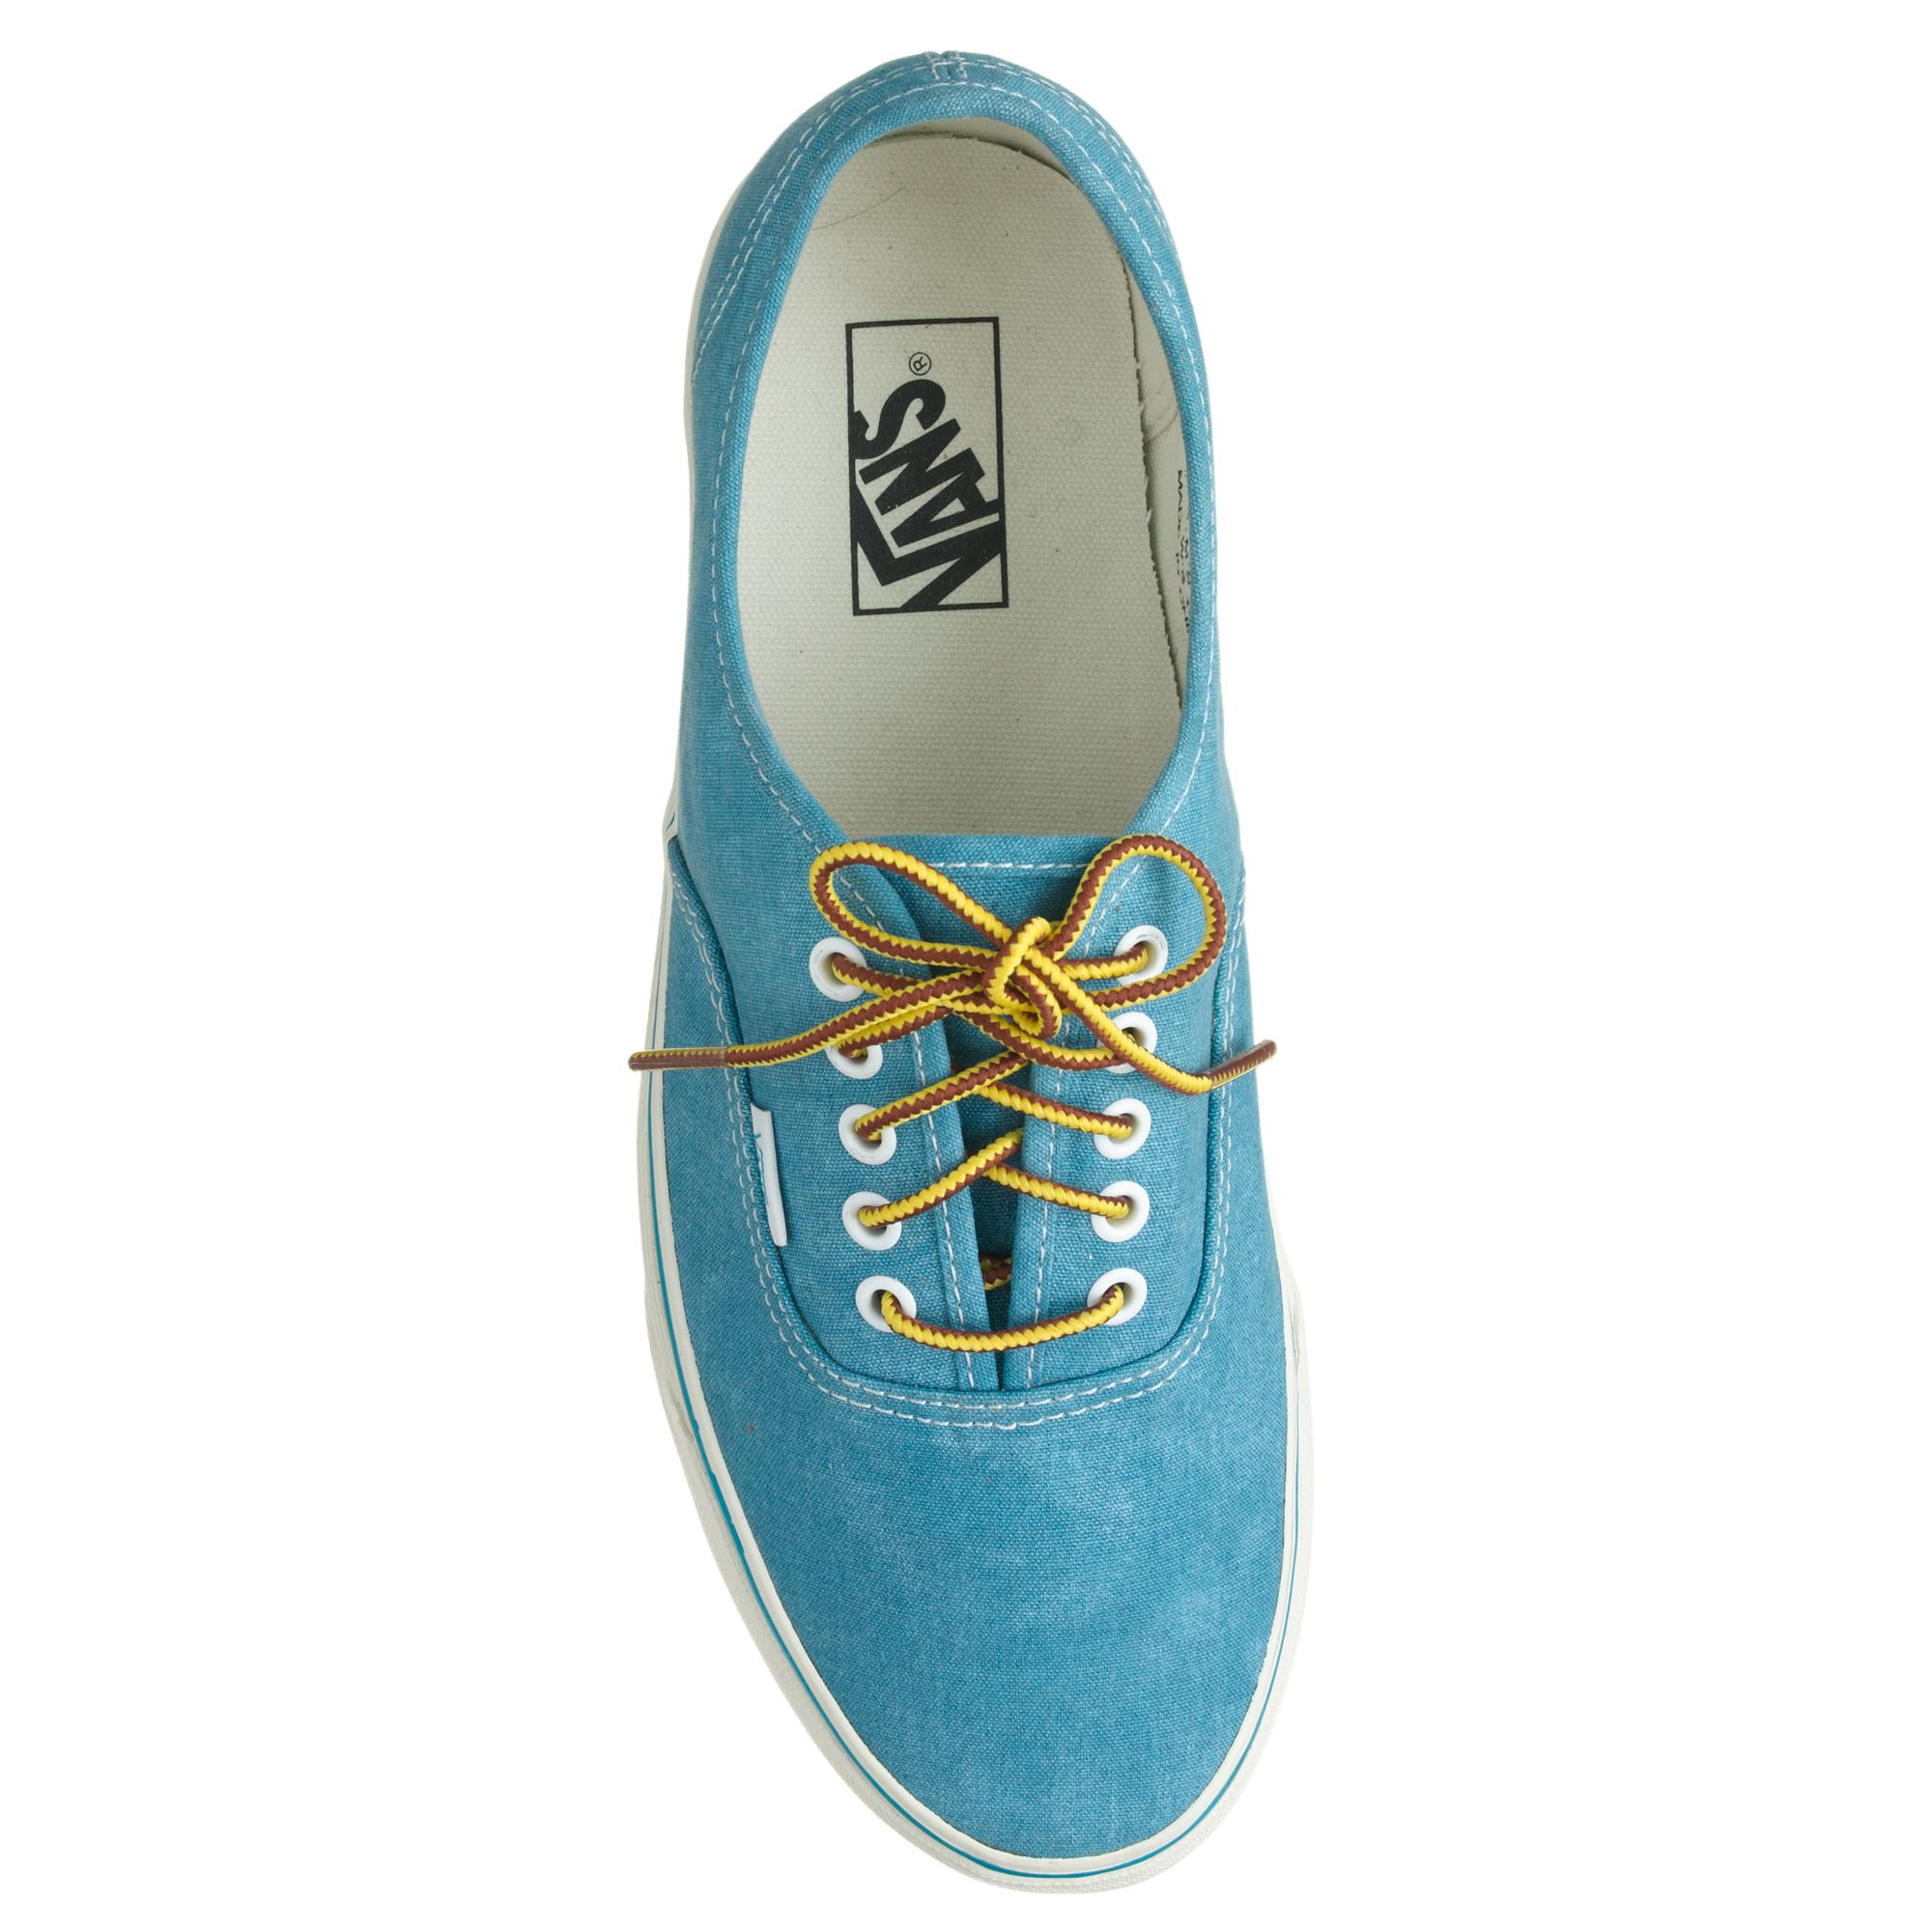 Lyst - J.Crew Washed Canvas Authentic Sneakers in Blue for Men